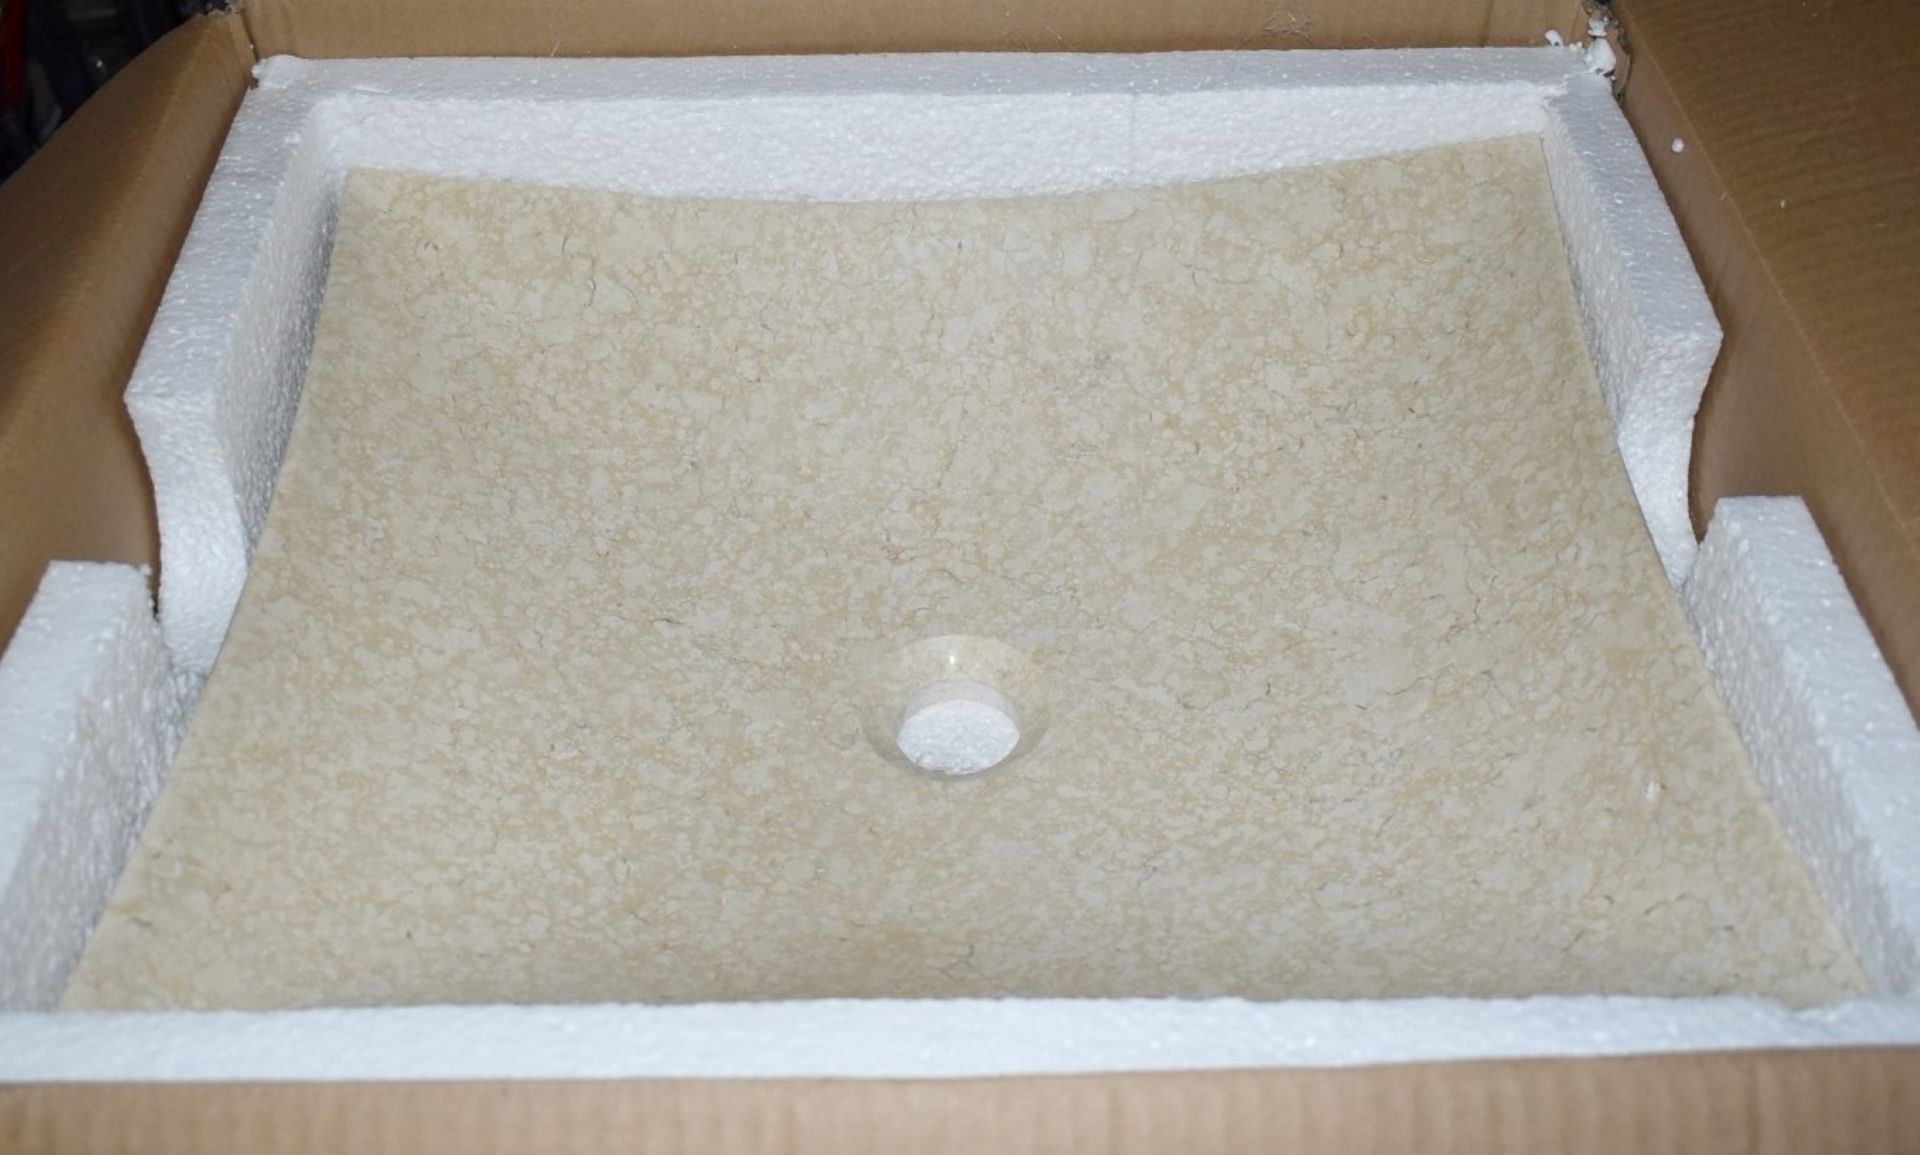 1 x Stonearth 'Aston' Solid Galala Marble Stone Countertop Sink Basin - New Boxed Stock - RRP £495 - Image 5 of 7